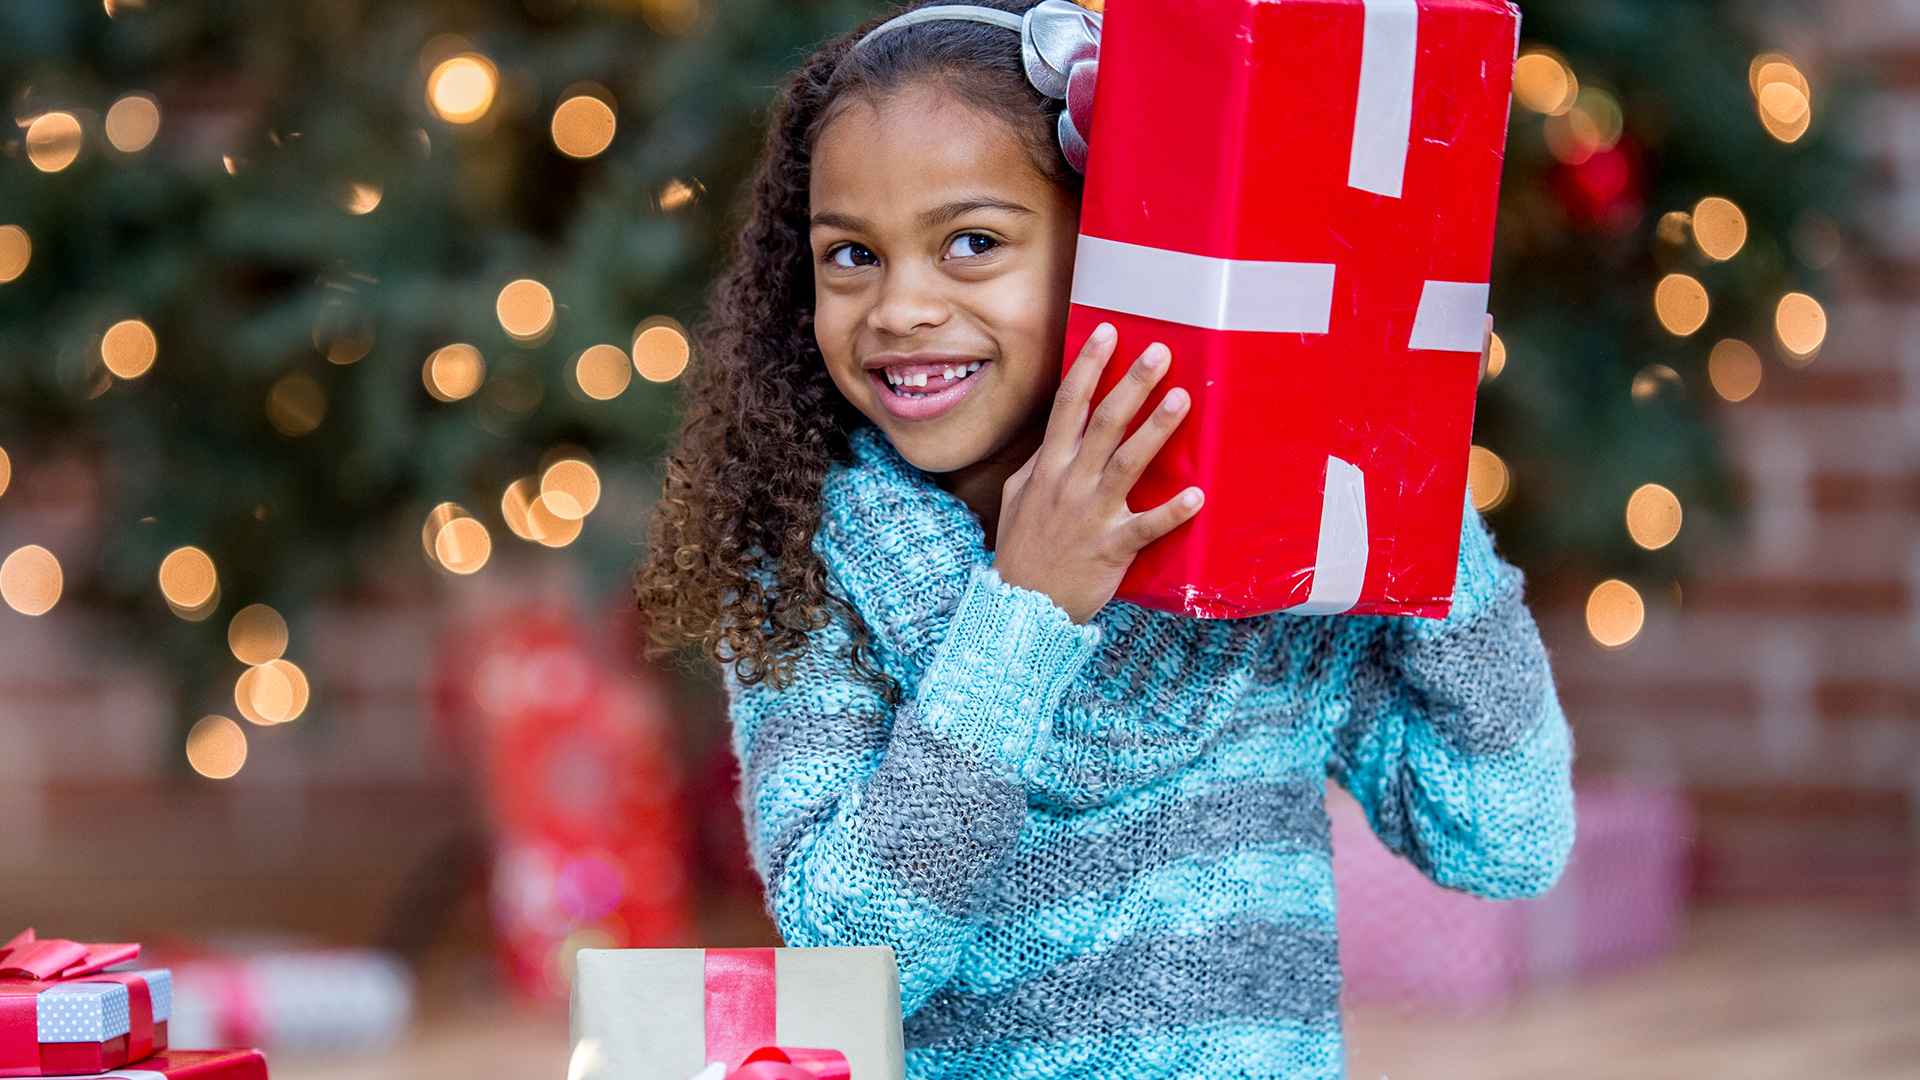 Make holiday gift-giving stress-free this season. An Atrium Health Levine Children’s pediatrician shares her recommendations for gifts that both kids and parents will love